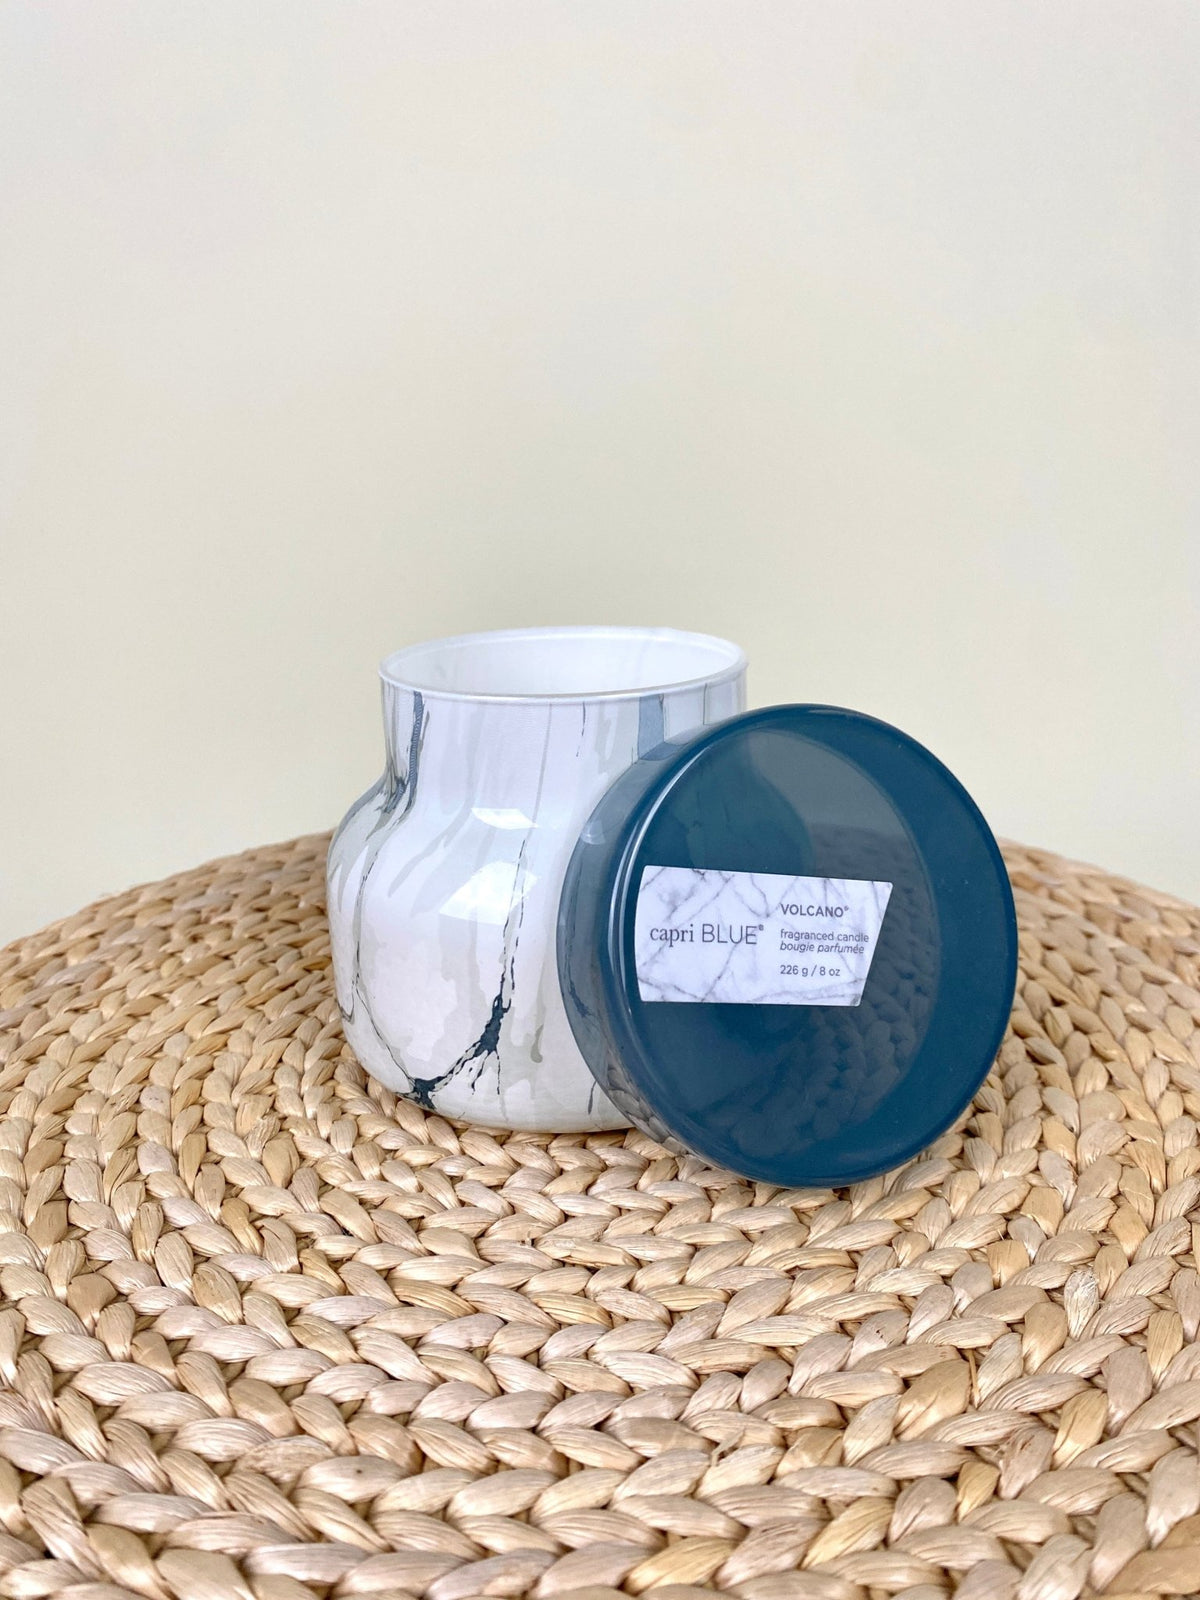 Capri Blue mod marble candle volcano 8oz - Trendy Candles and Scents at Lush Fashion Lounge Boutique in Oklahoma City